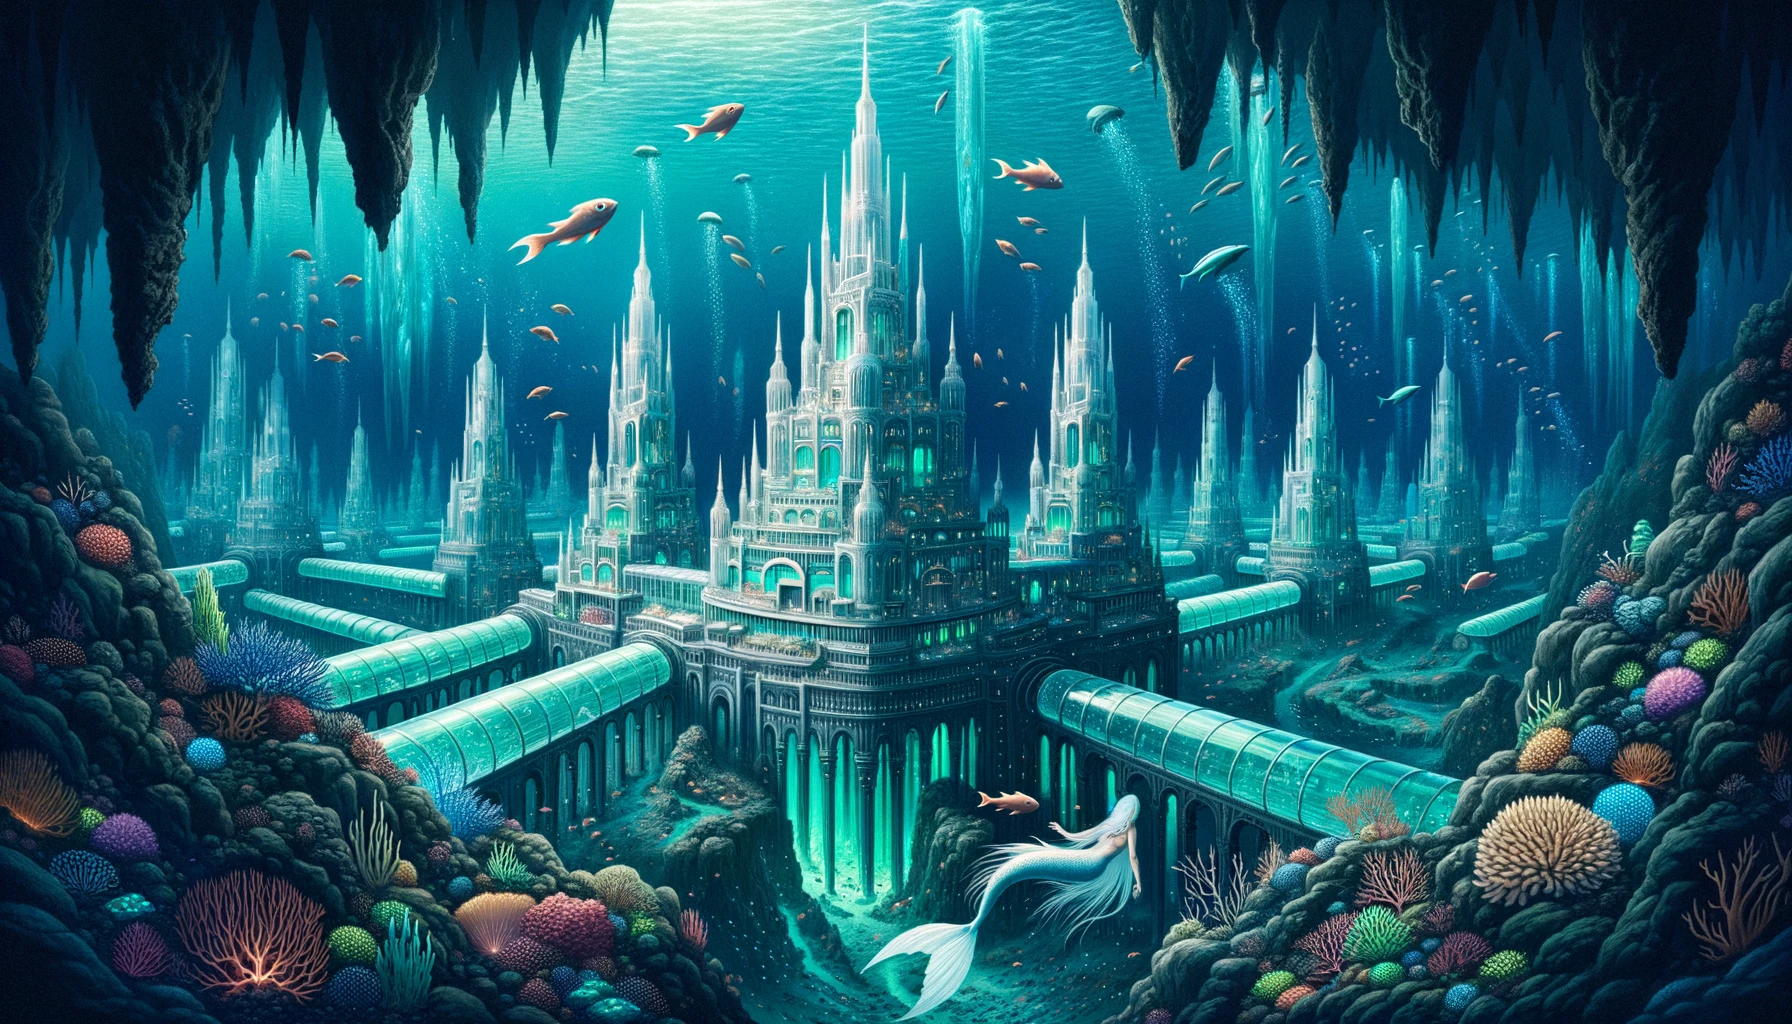 Illustration of a city submerged beneath the ocean's surface. Crystal palaces, with spires that touch the sea's ceiling, stand as a testament to the city's grandeur. The city's light source comes from bioluminescent creatures, their glow painting the underwater world in shades of blue and green. Merfolk, representing the city's populace, swim with elegance, their paths often taking them through lush coral gardens. Transparent tunnels, like arteries, connect the city's various sections, ensuring connectivity and communication.